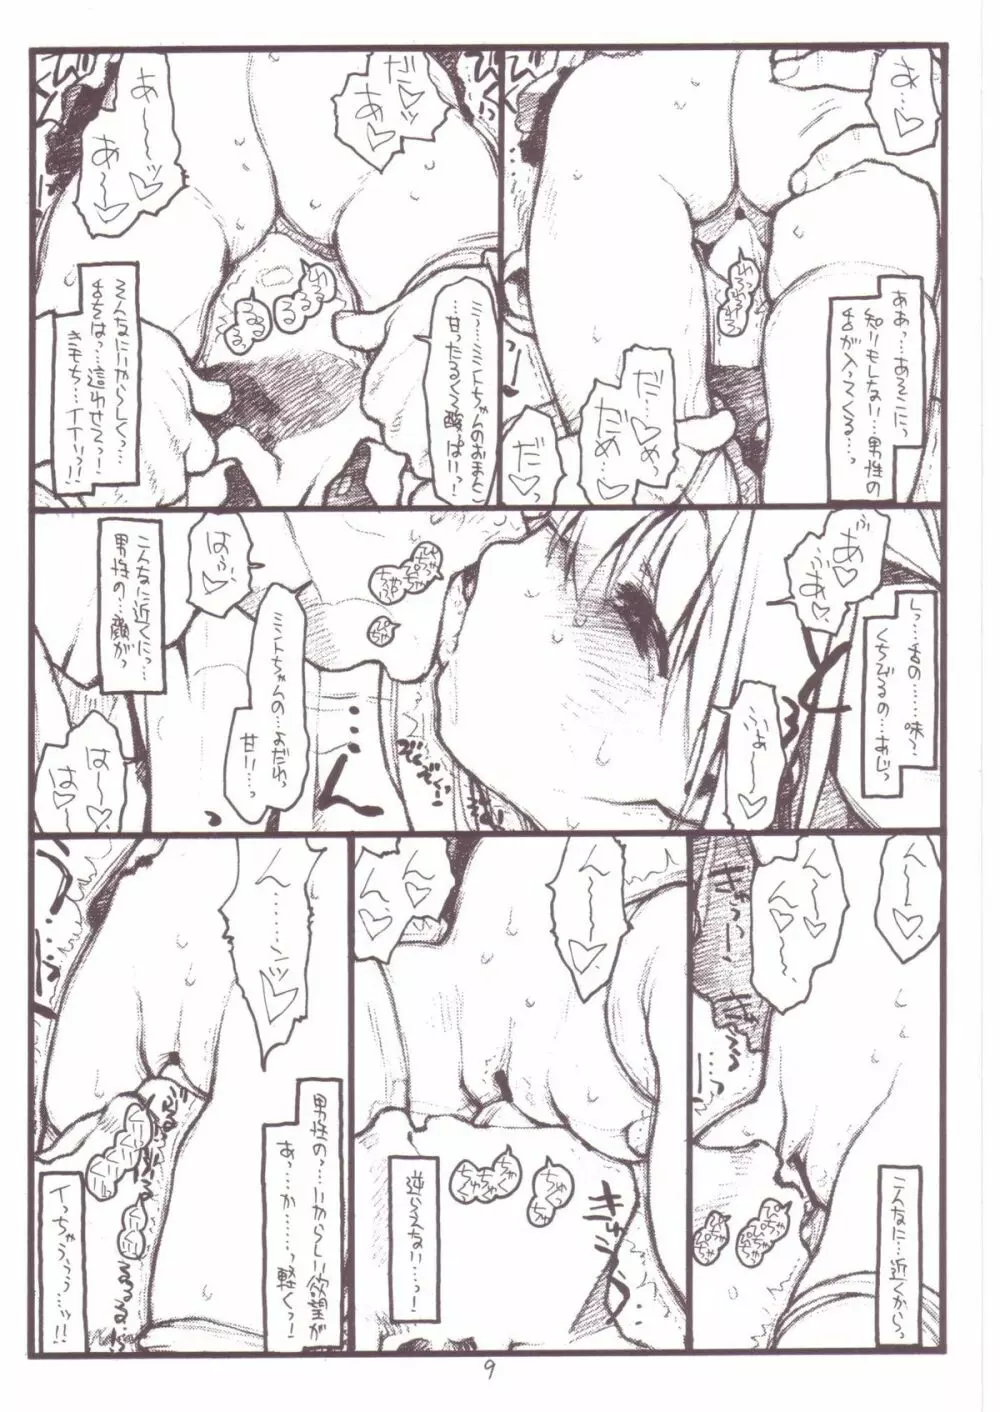 Mint Erotic Extended Version - page8